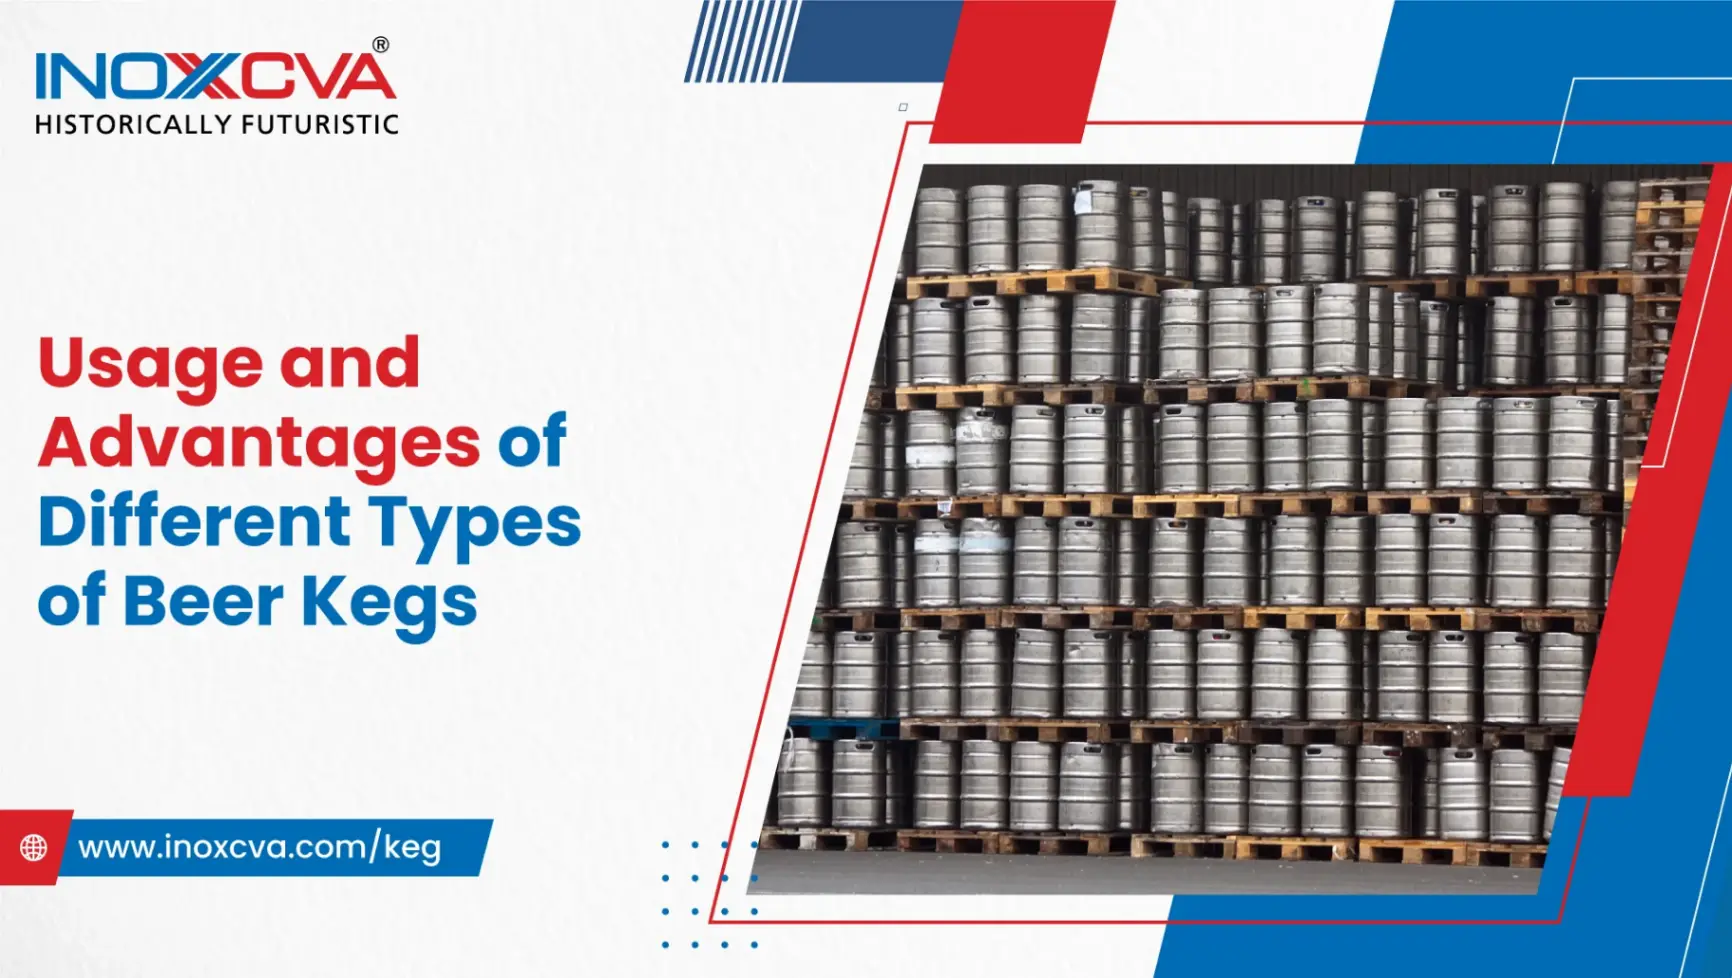 Take a Detailed Look At the Usage and
                            Advantages
                            of
                            Different Types of Beer Kegs